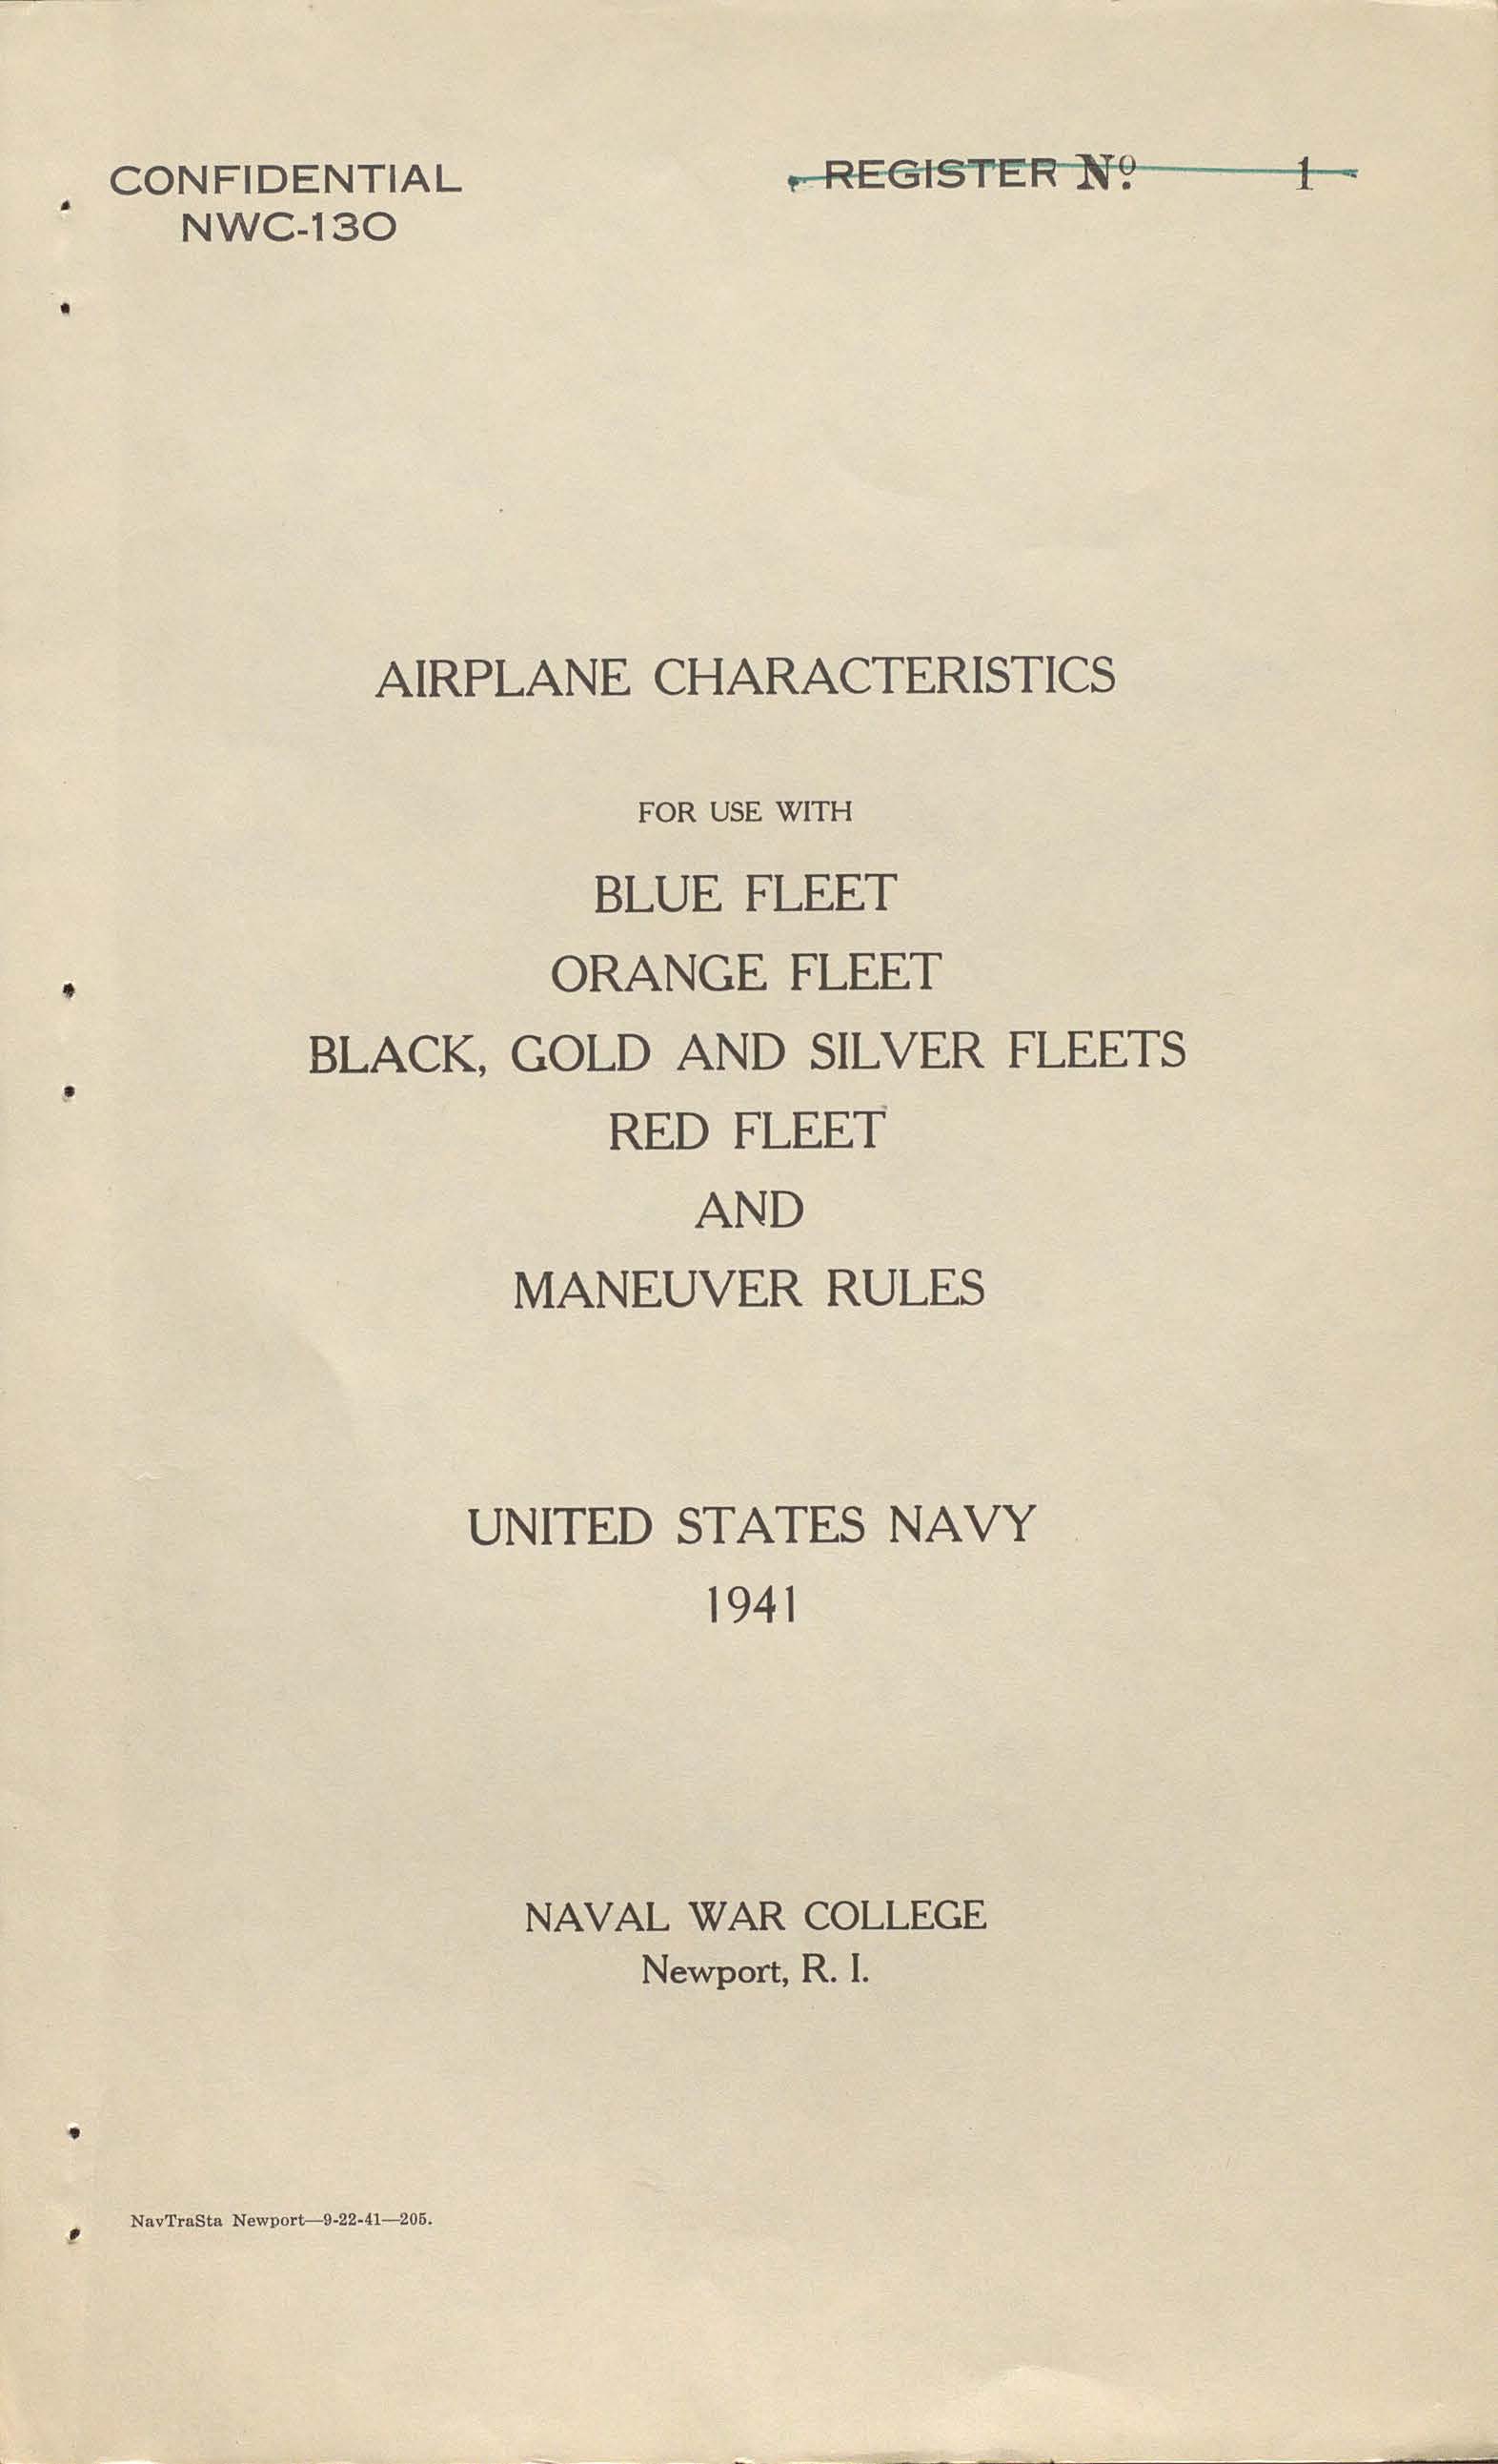 Airplane Characteristics for use with Blue Fleet; Orange Fleet; Black, Gold and Silver Fleets; Red Fleet and Maneuver Rules